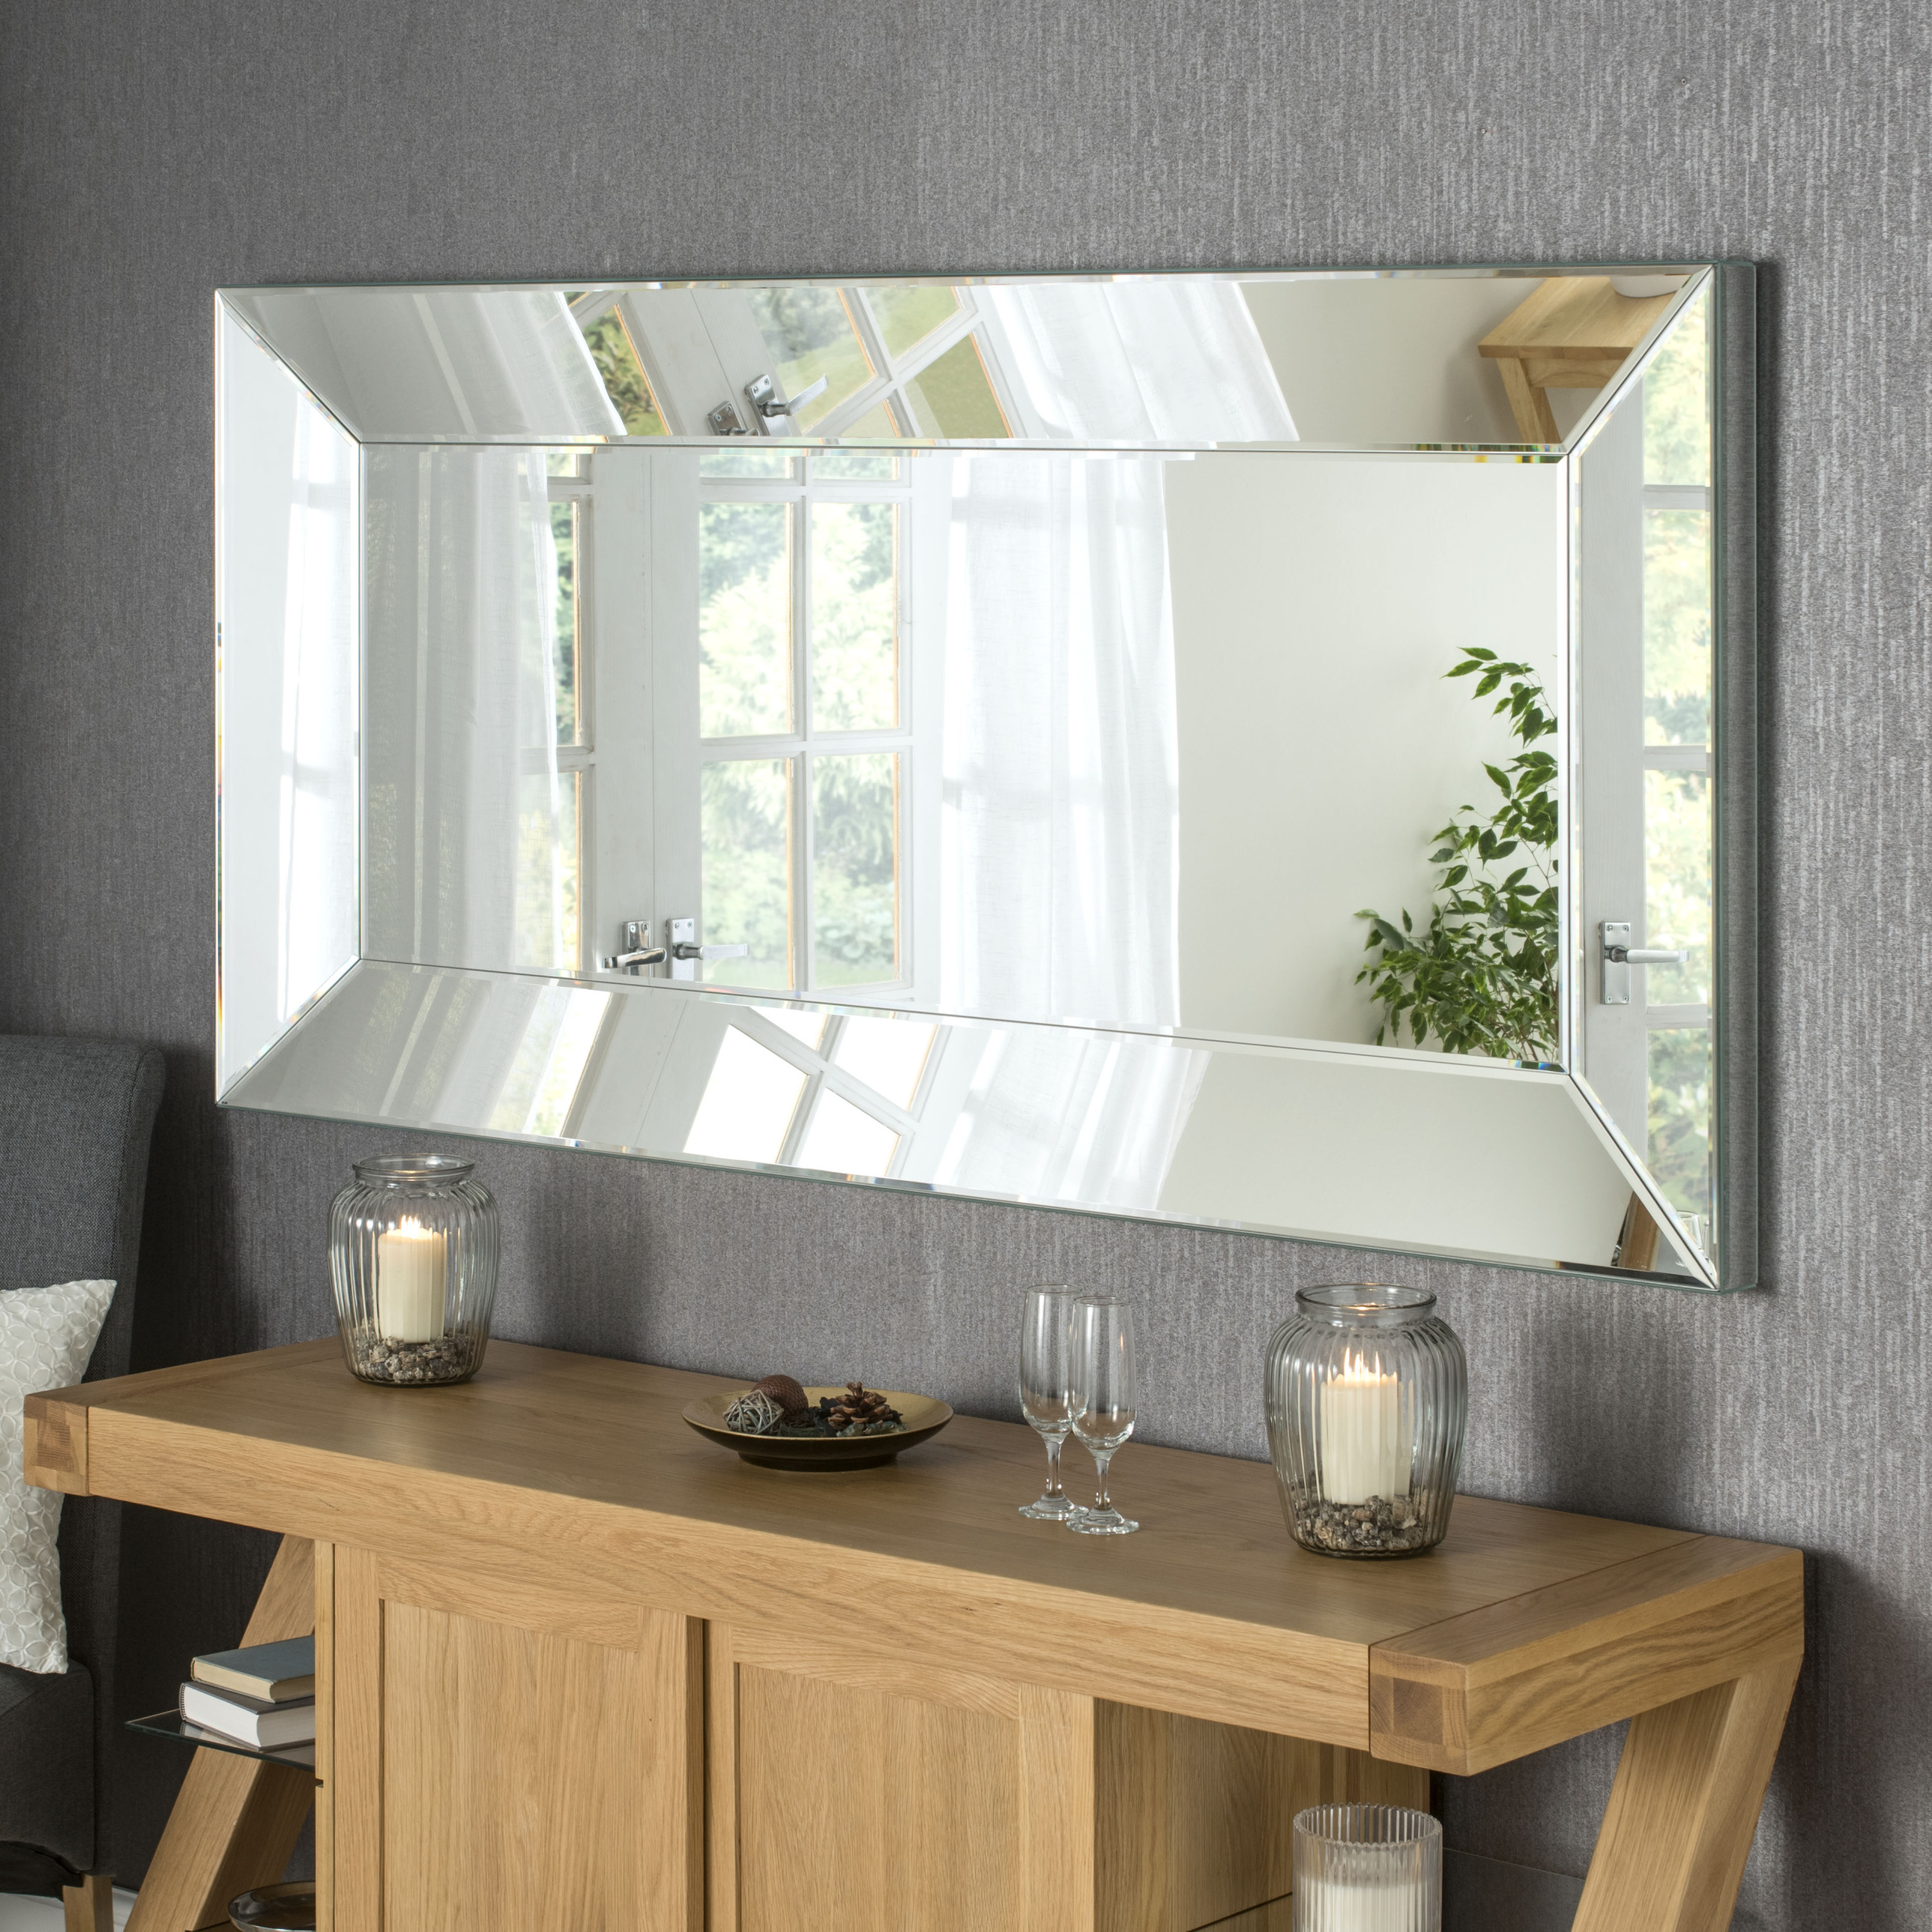 Art58 Box Mirror A Large Art Deco Wall Mirror Ideally Suited Above Your Sofa Or Your Bed A Rectangle Shape Modern Mirror For Sale In Ireland A Popular Choice Here In Ireland